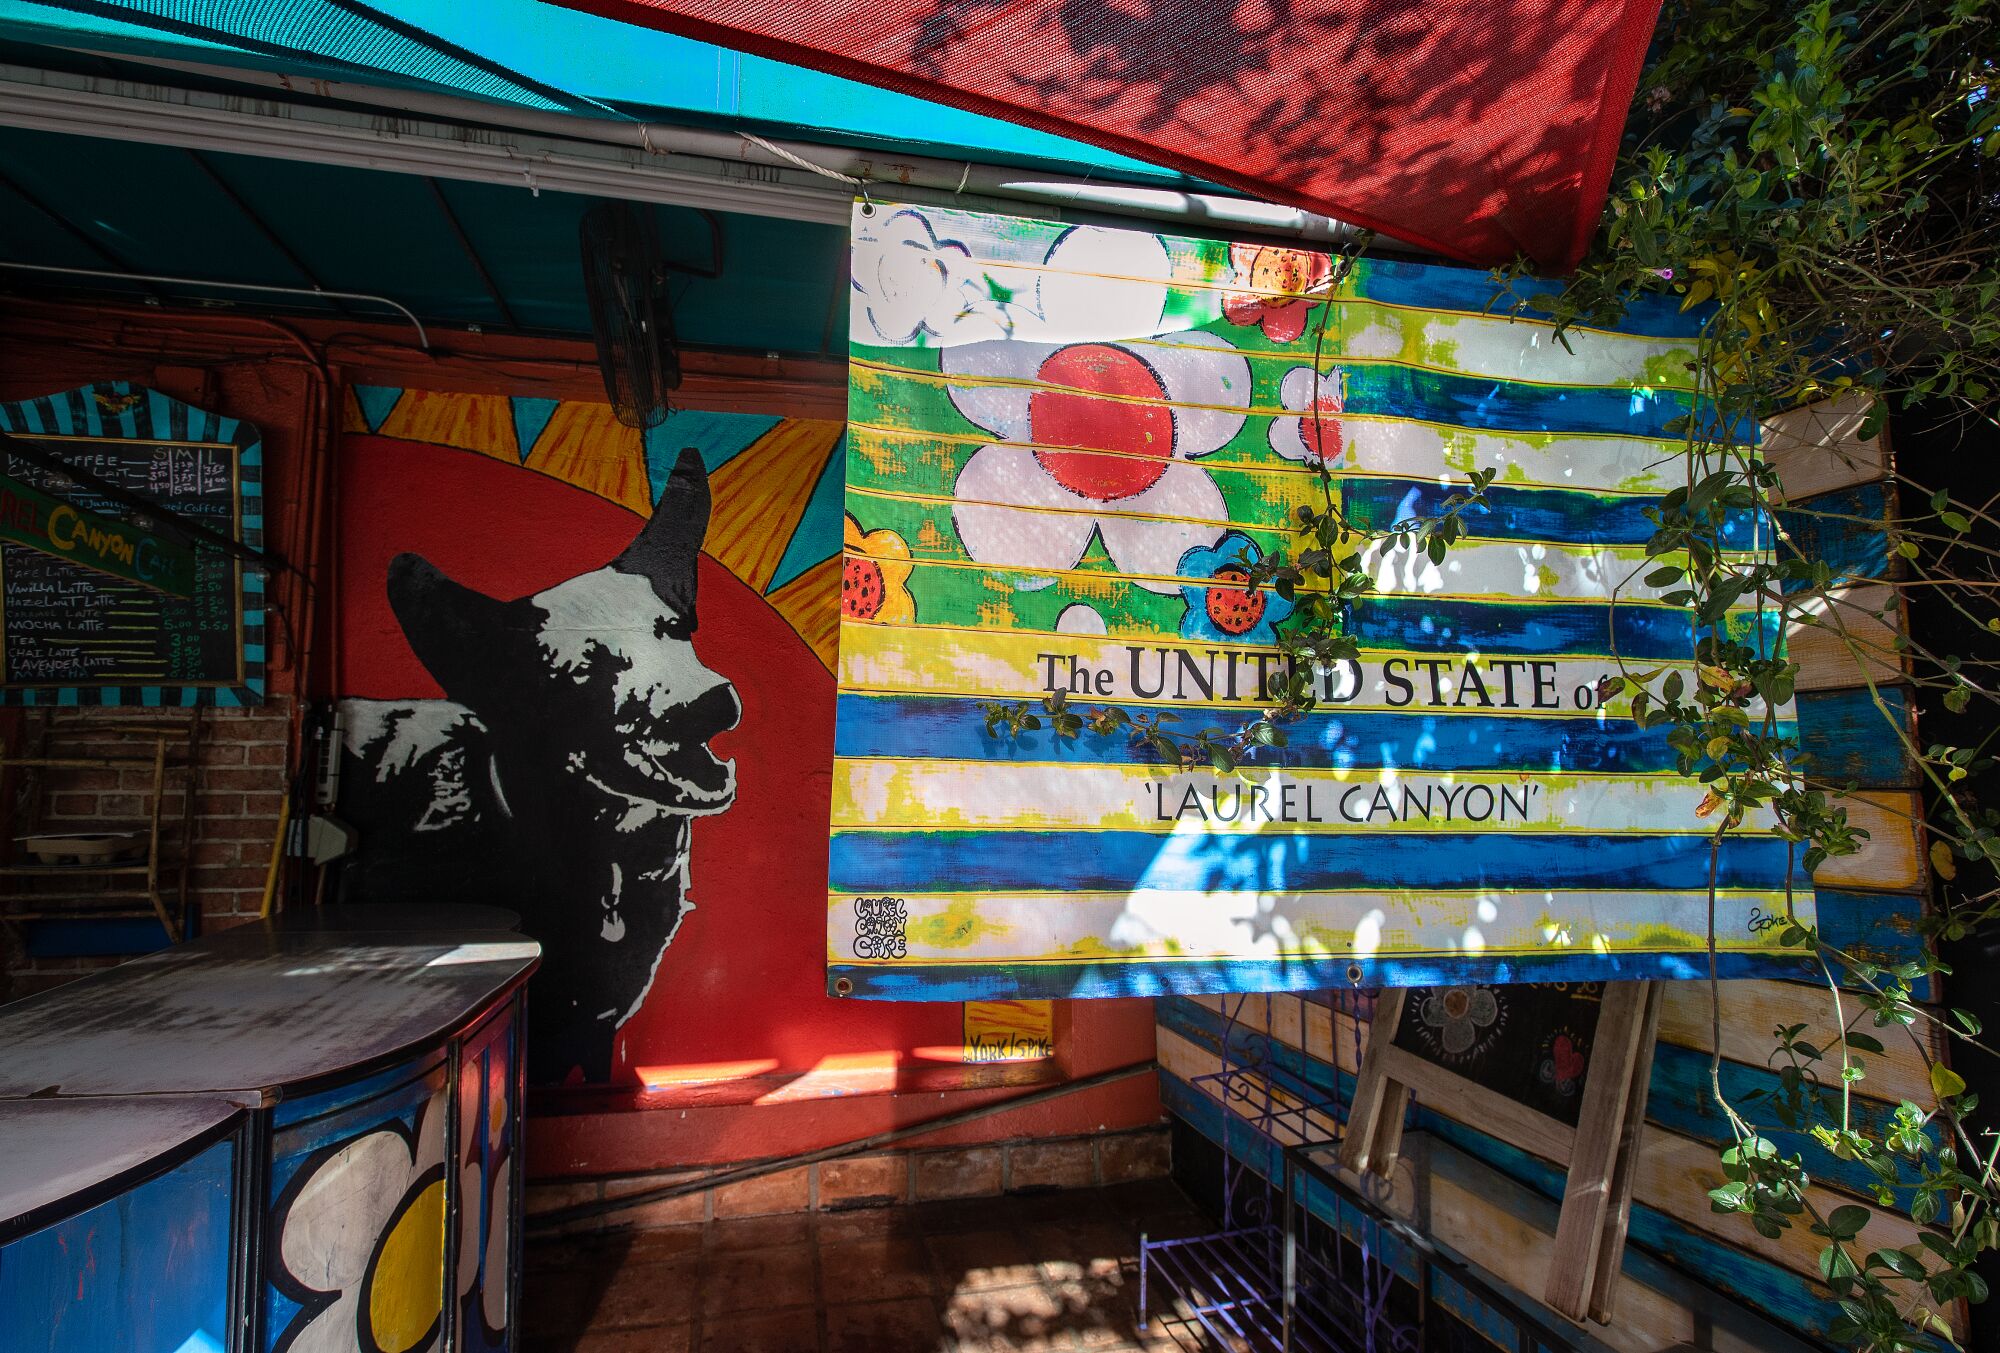 Artwork on display in front of the Canyon Country Store.